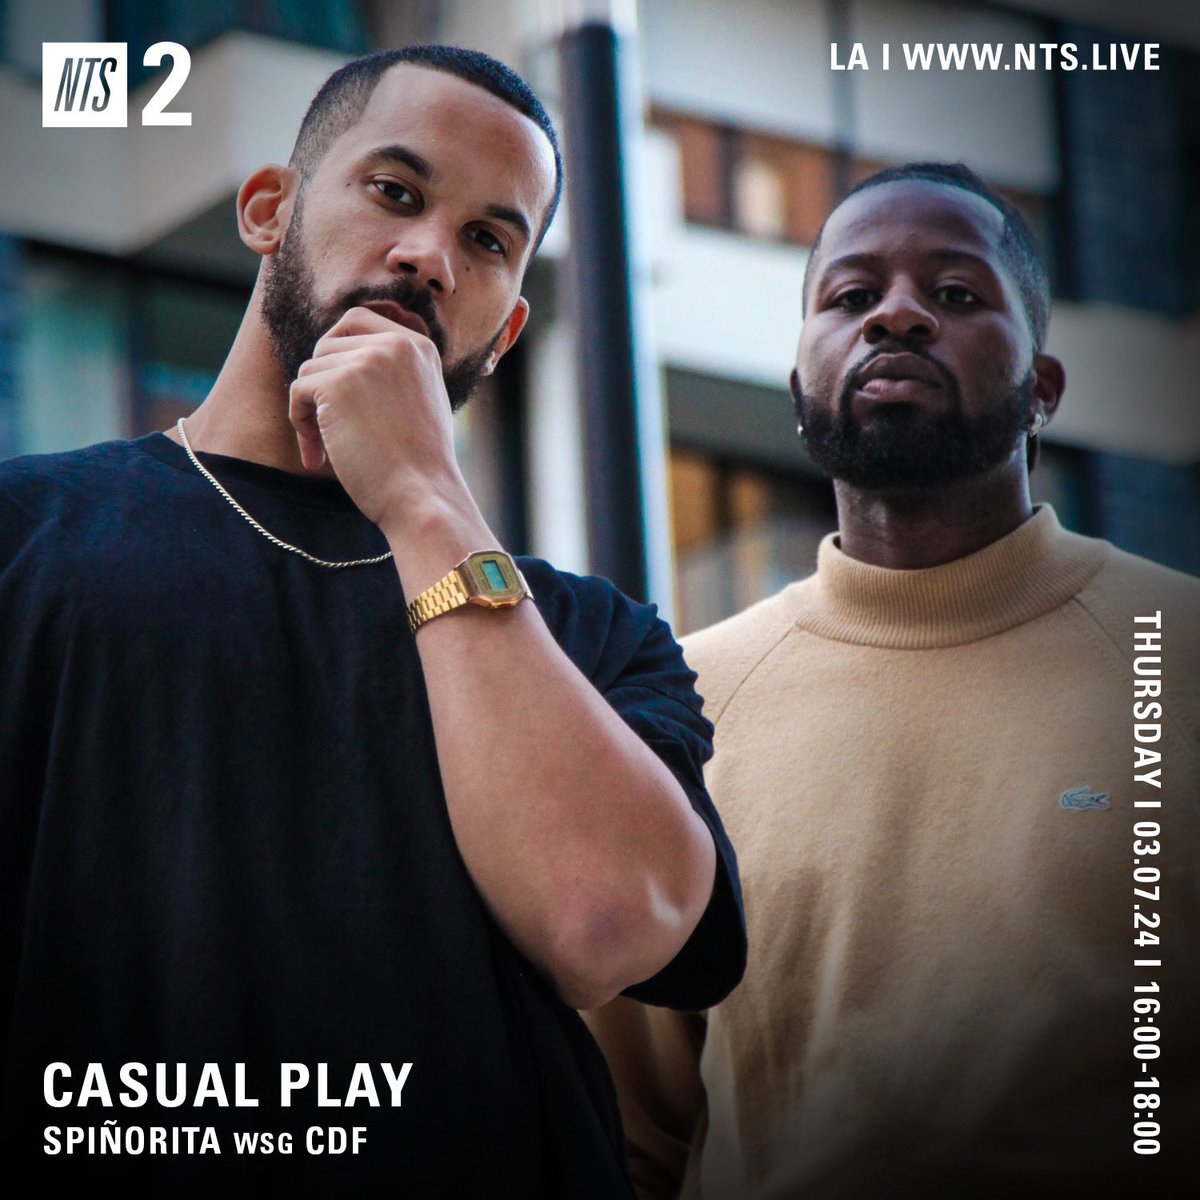 My special guests on Casual Play are Coup De Foudre (love at first sight ❤️) Alex Coly & Chuck Black from France by way of Amsterdam. Tune in from 4-6pm PT on NTS.live/2